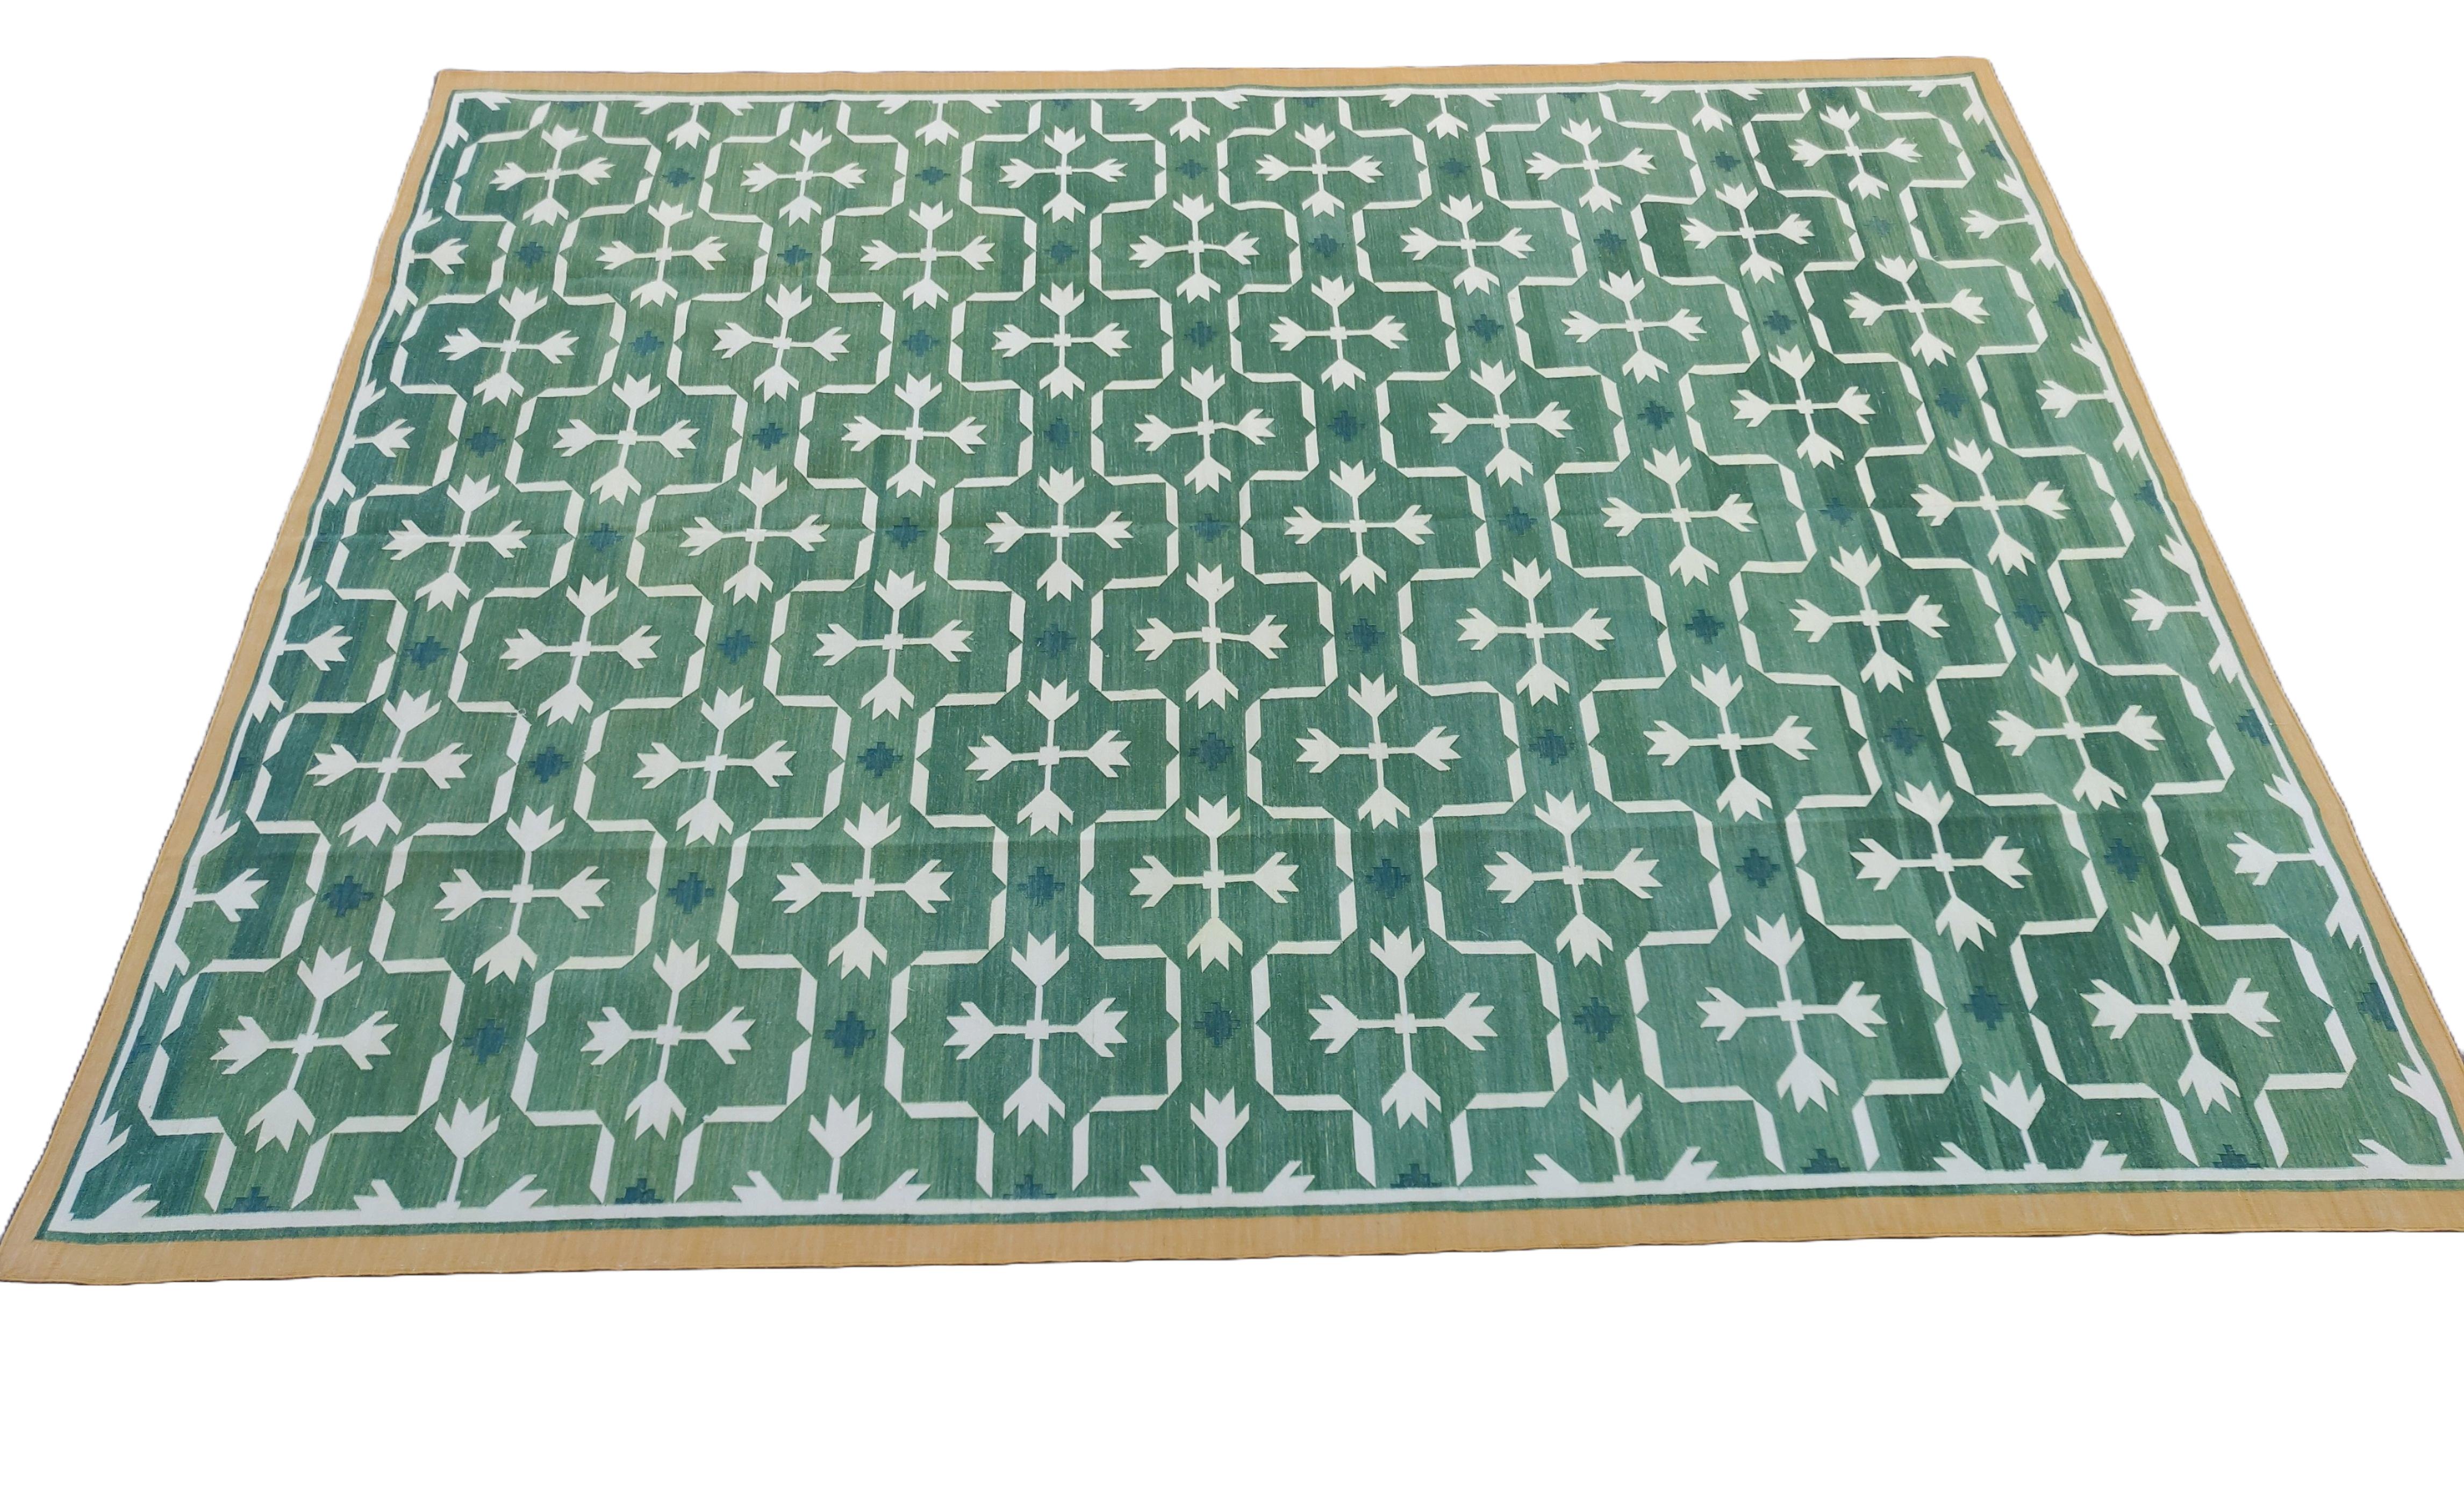 Hand-Woven Handmade Cotton Area Flat Weave Rug, Green And White Leaf Pattern Indian Dhurrie For Sale